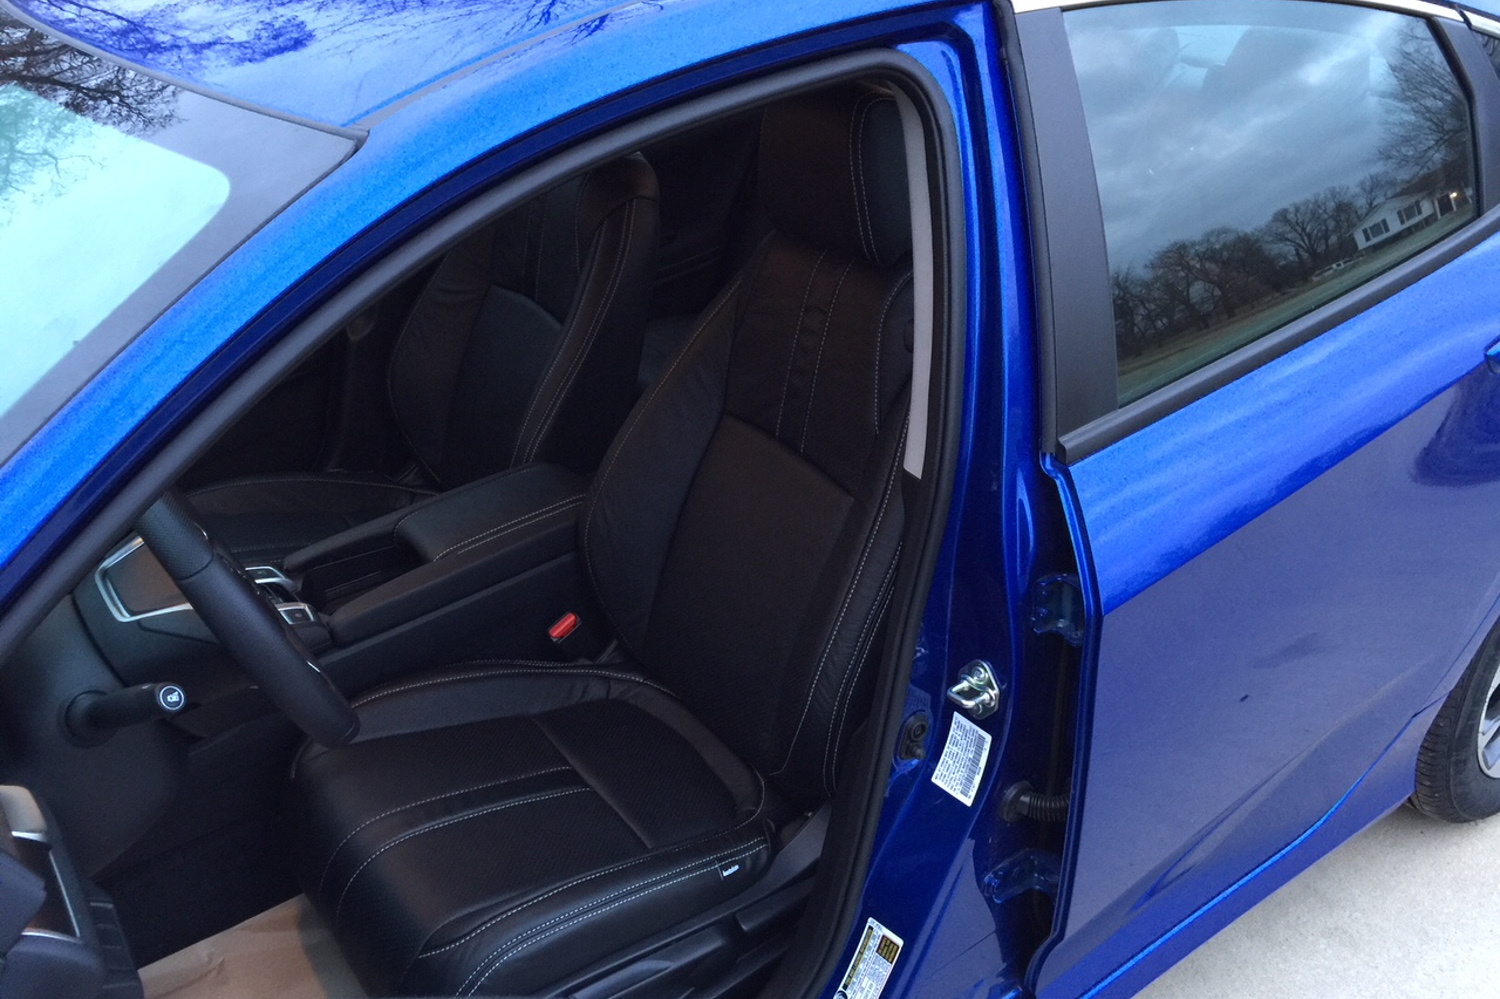 Leather & Restyling - A&J Autotrim